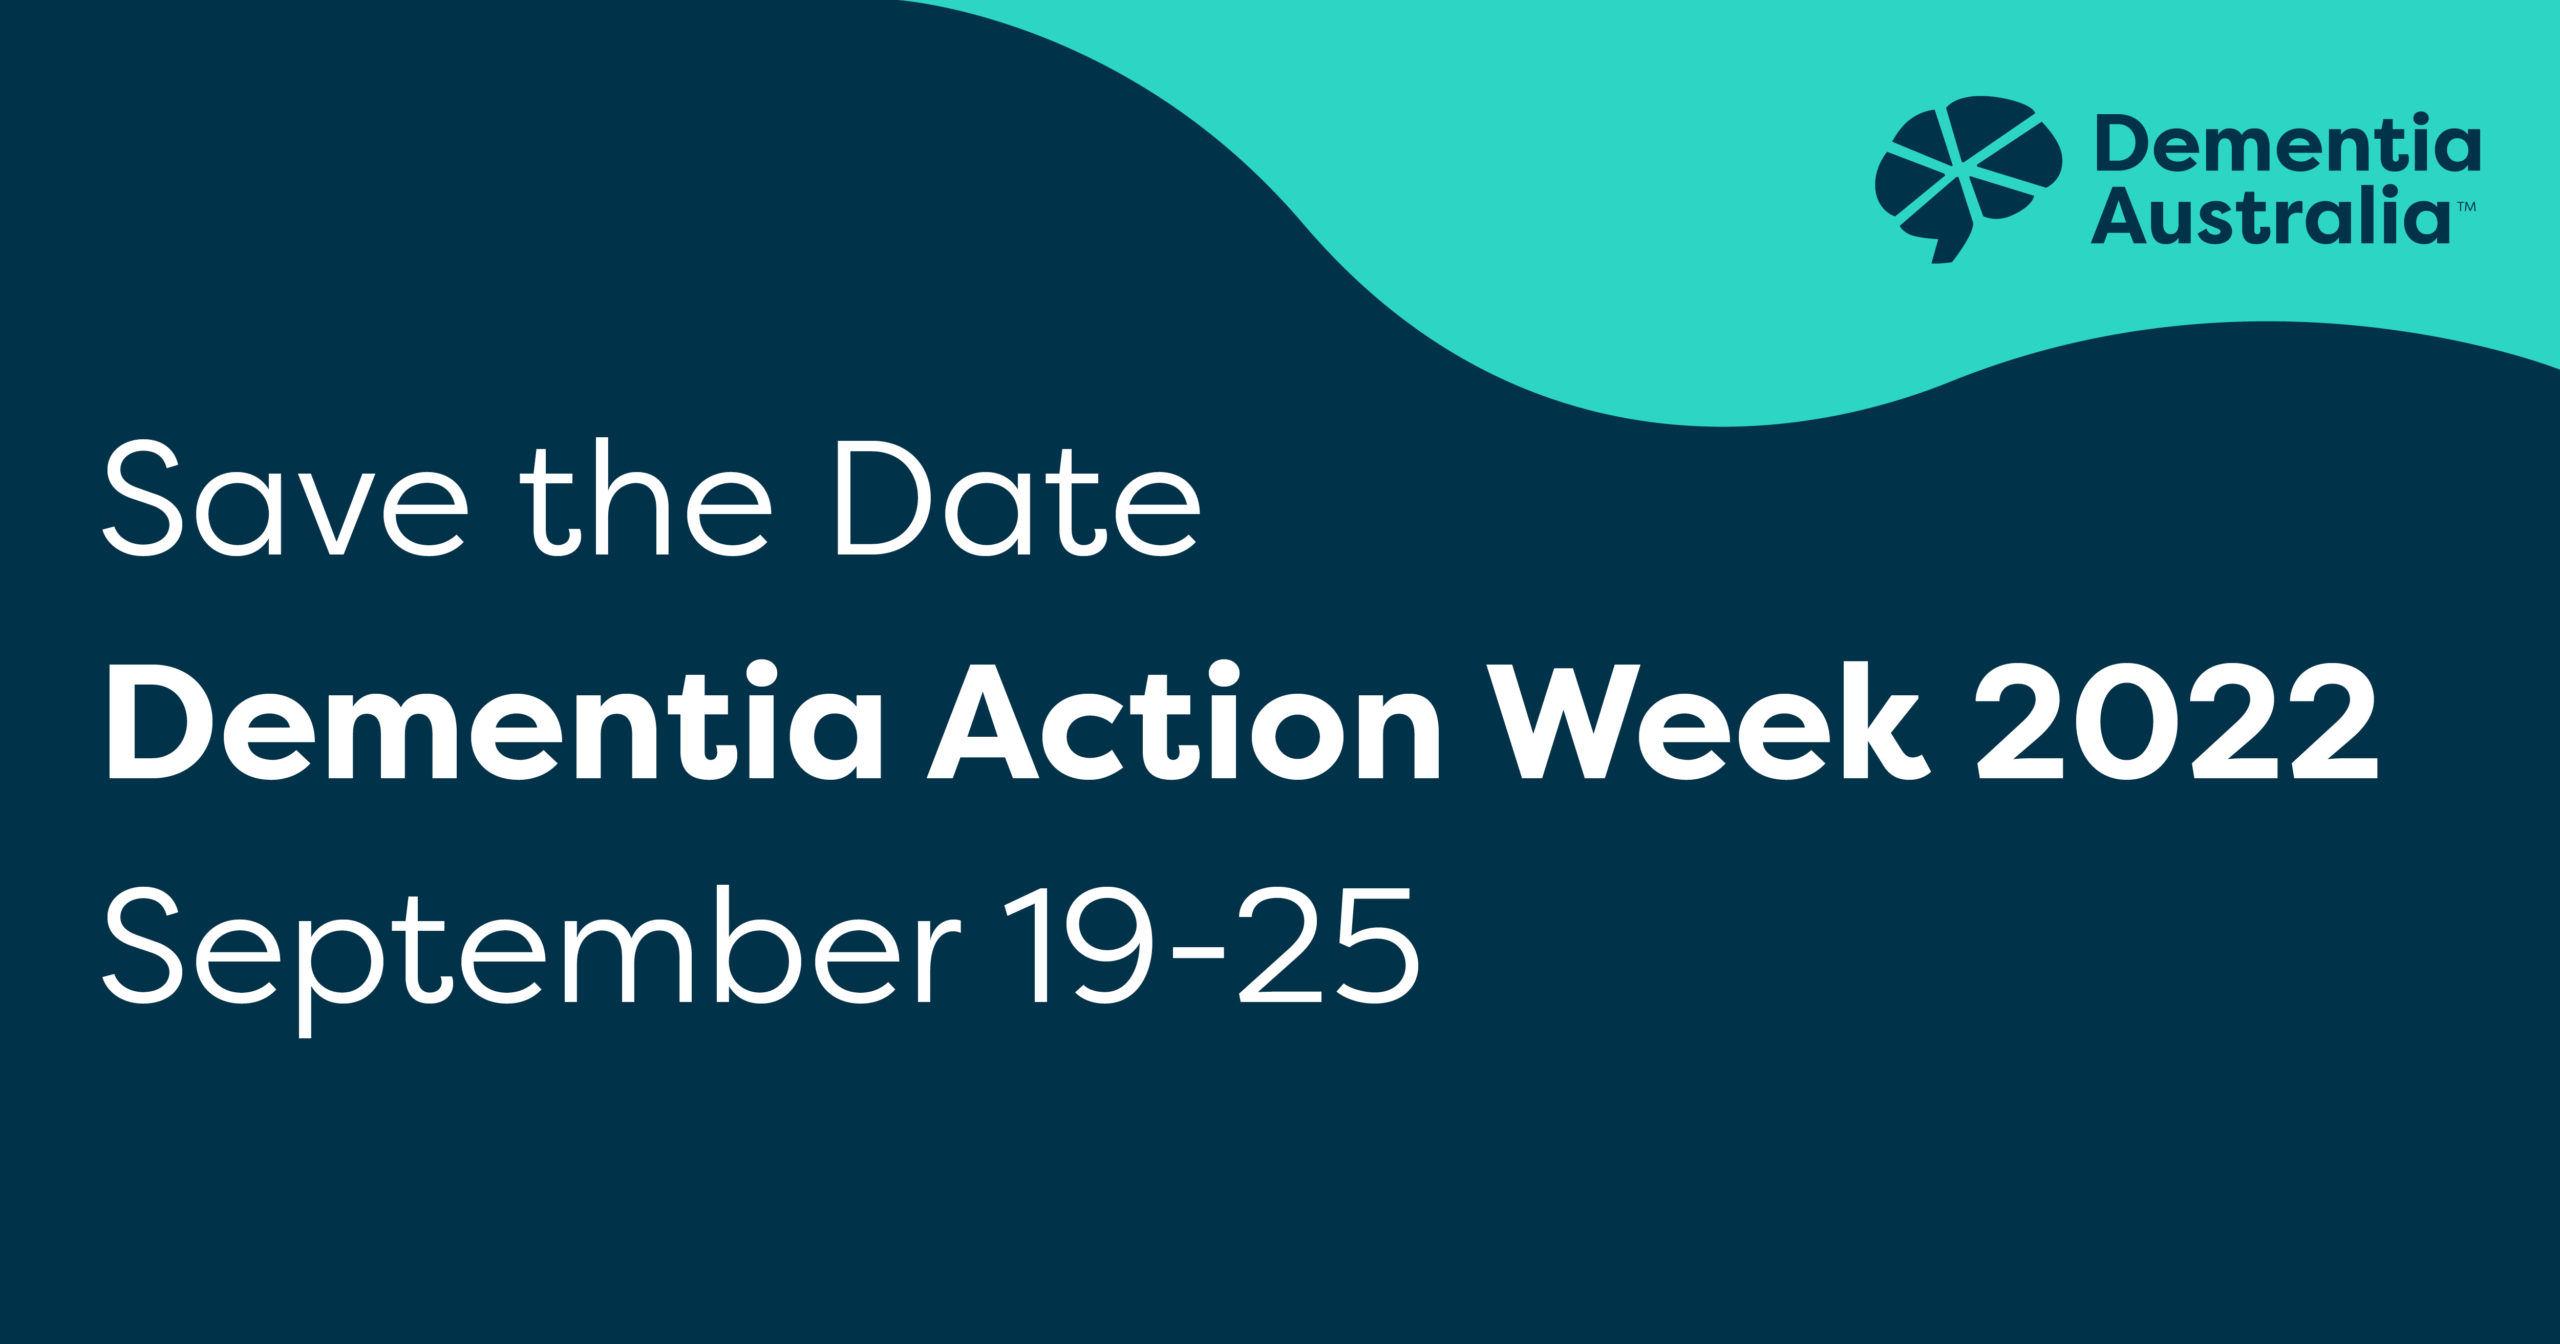 Save the date for dementia action week 2022